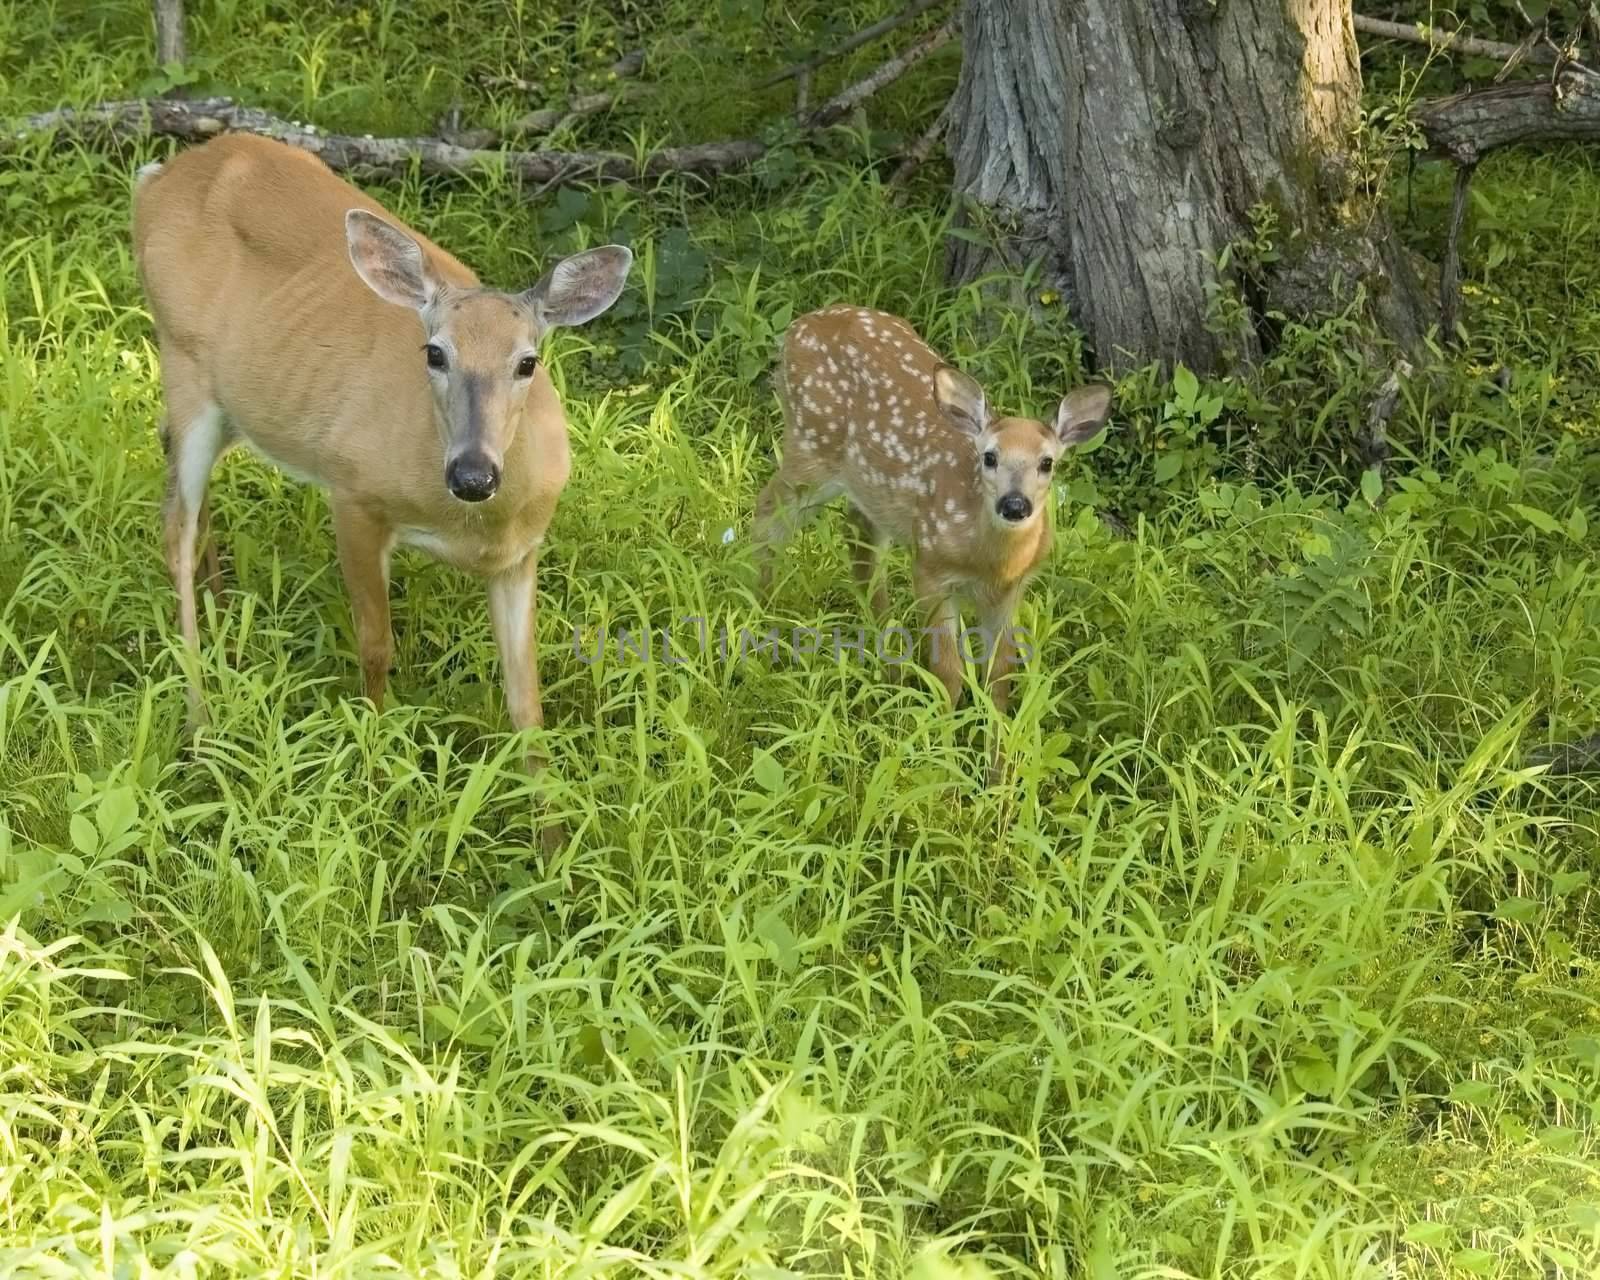 Whitetail deer and fawn standing in a field.